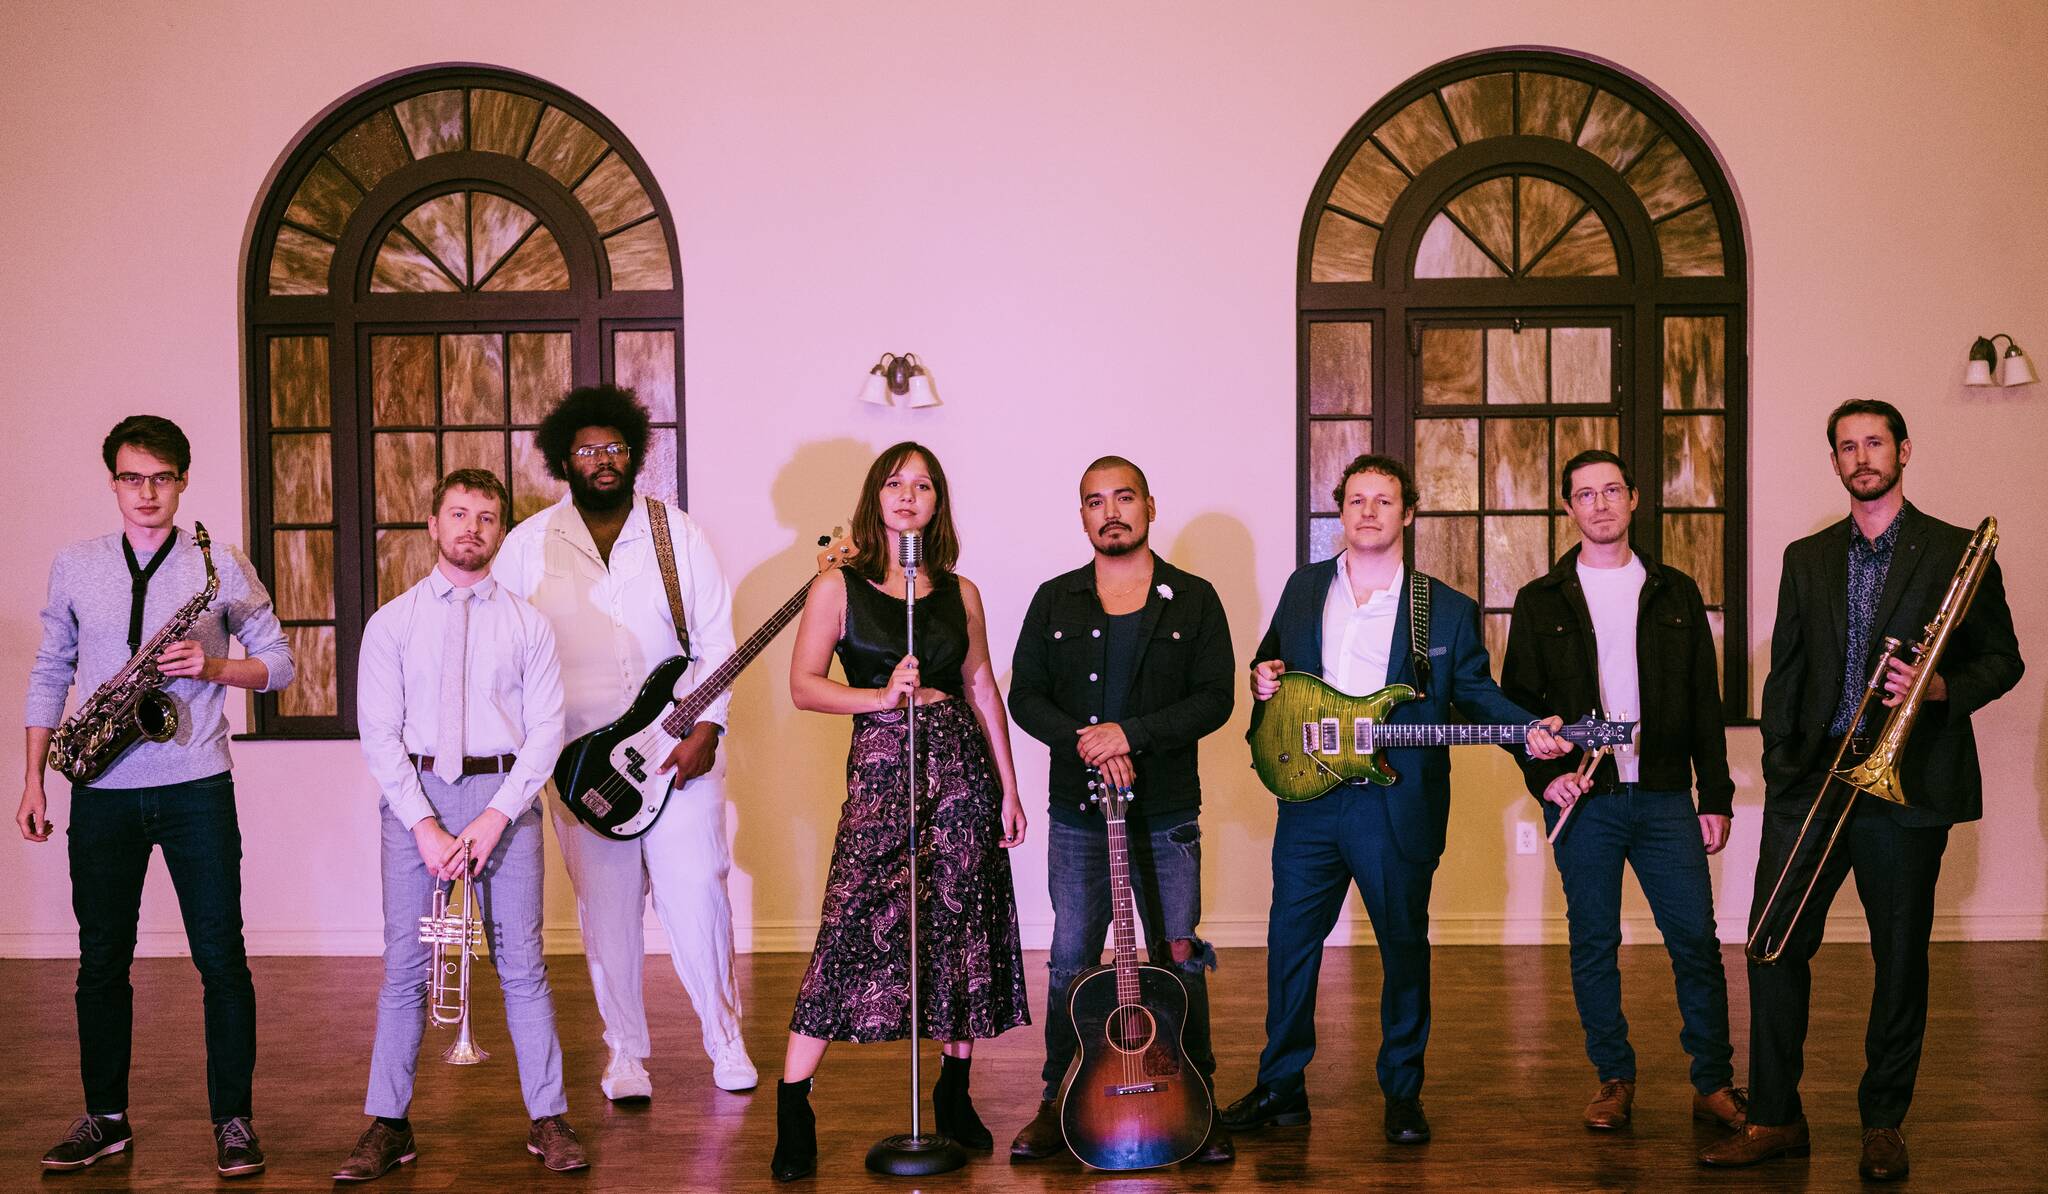 Lindstrom and The Limit, from left to right, Evan Lorbecki, Tyler Stevens, Shaun Crawford, Nikki Pope, Aaron Lindstrom, Dave Thurston, Eric Stevens and Quinn Christopherson. Photo courtesy of Joanne Leadbetter